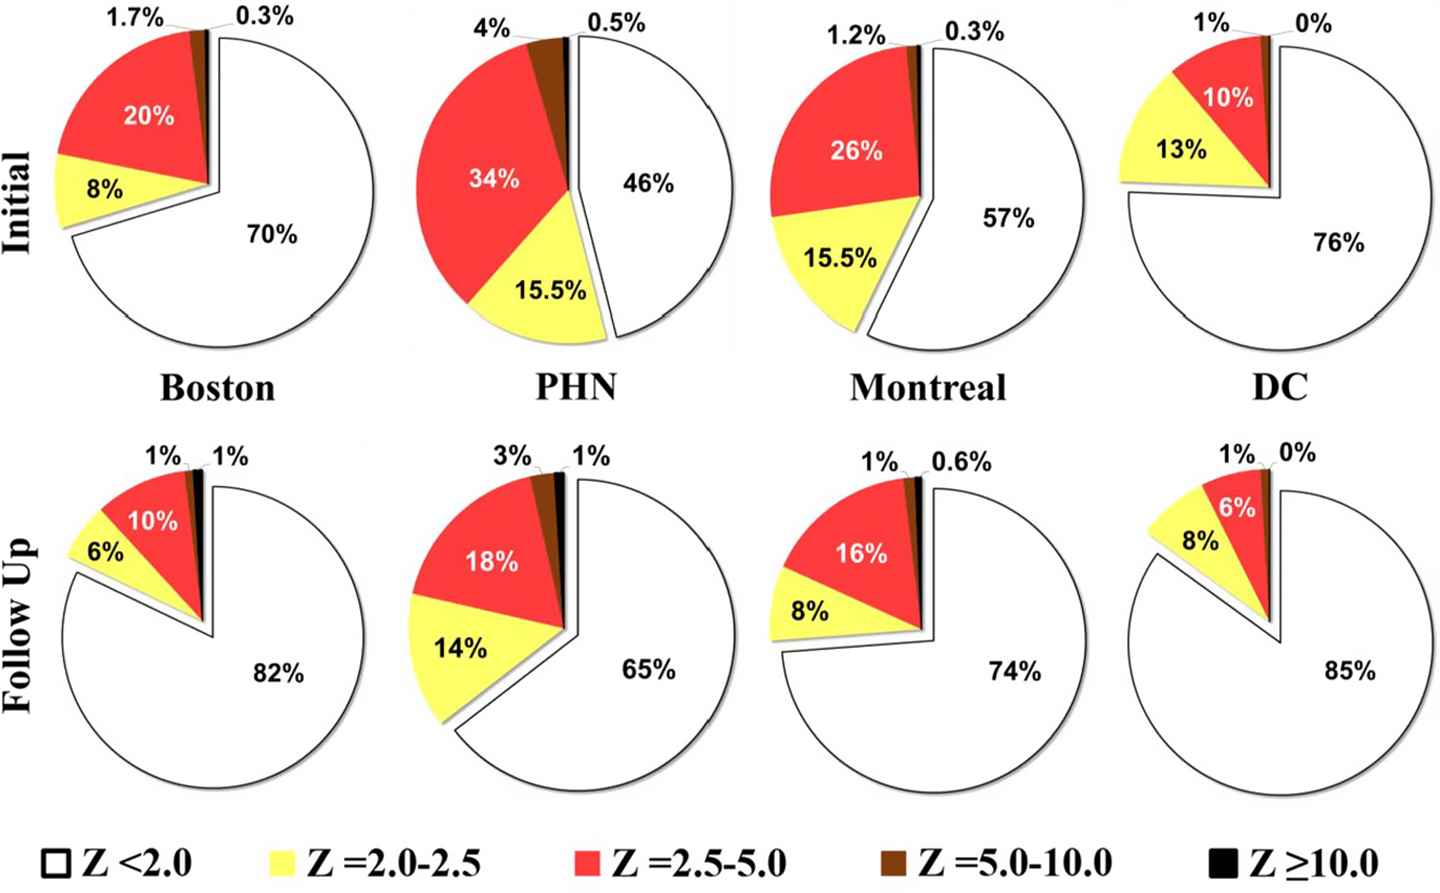 Impact of Z score system on the management of coronary artery 